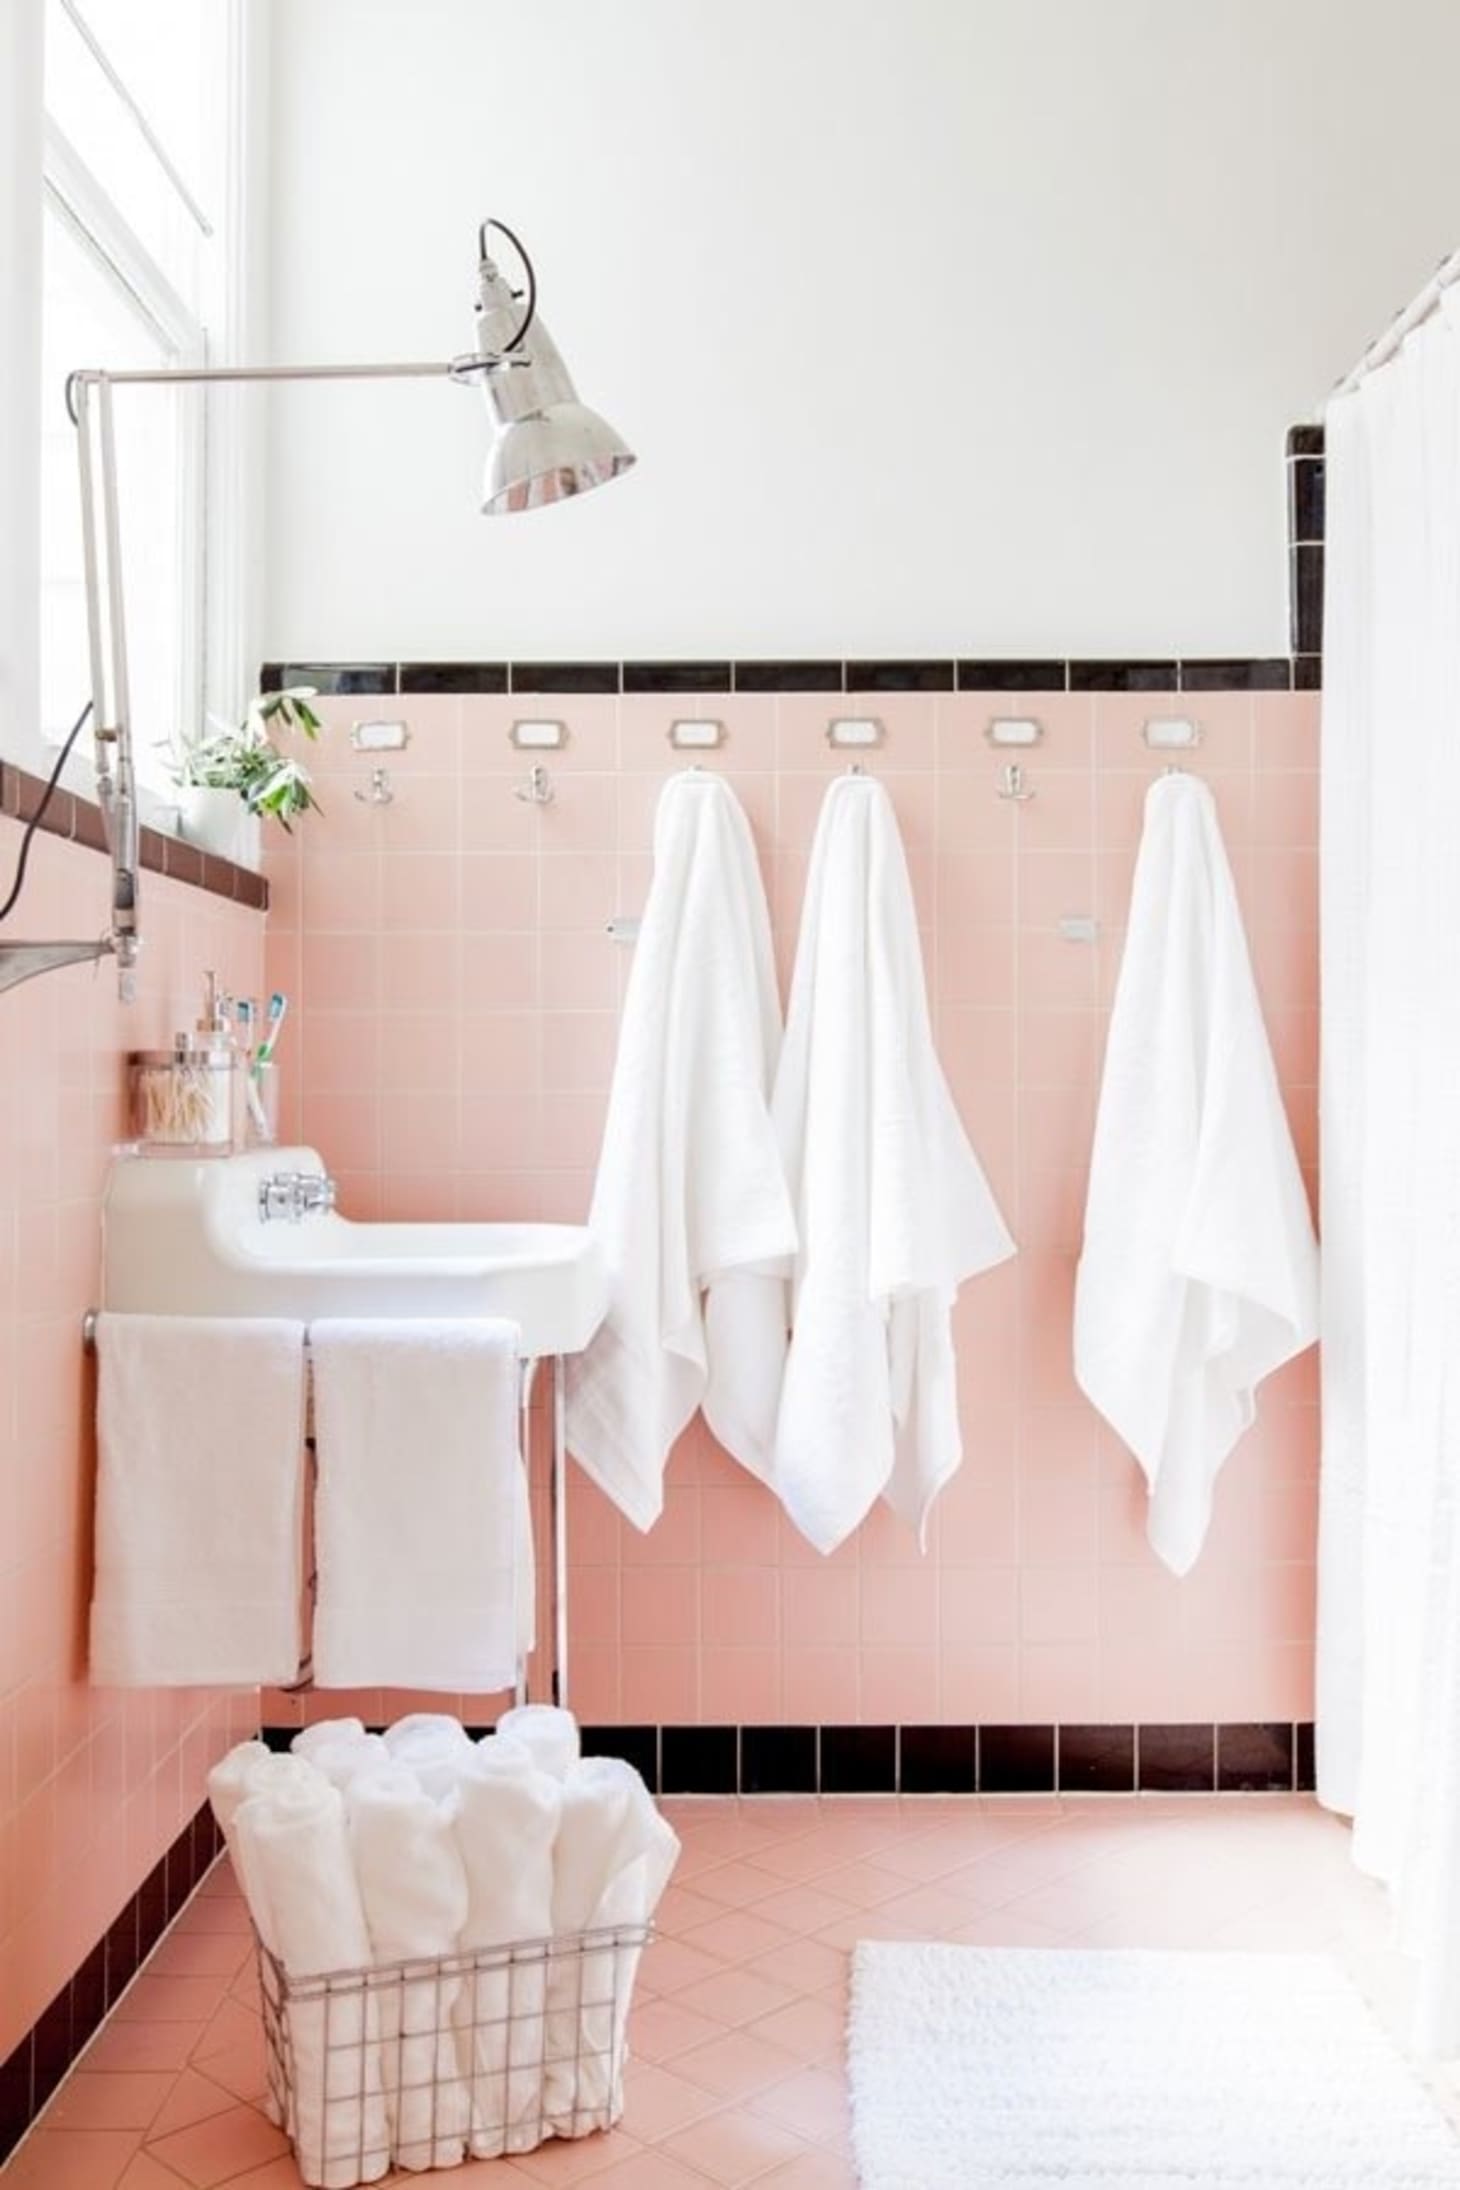 At First Blush: Pale Pink Decorating Ideas | Apartment Therapy